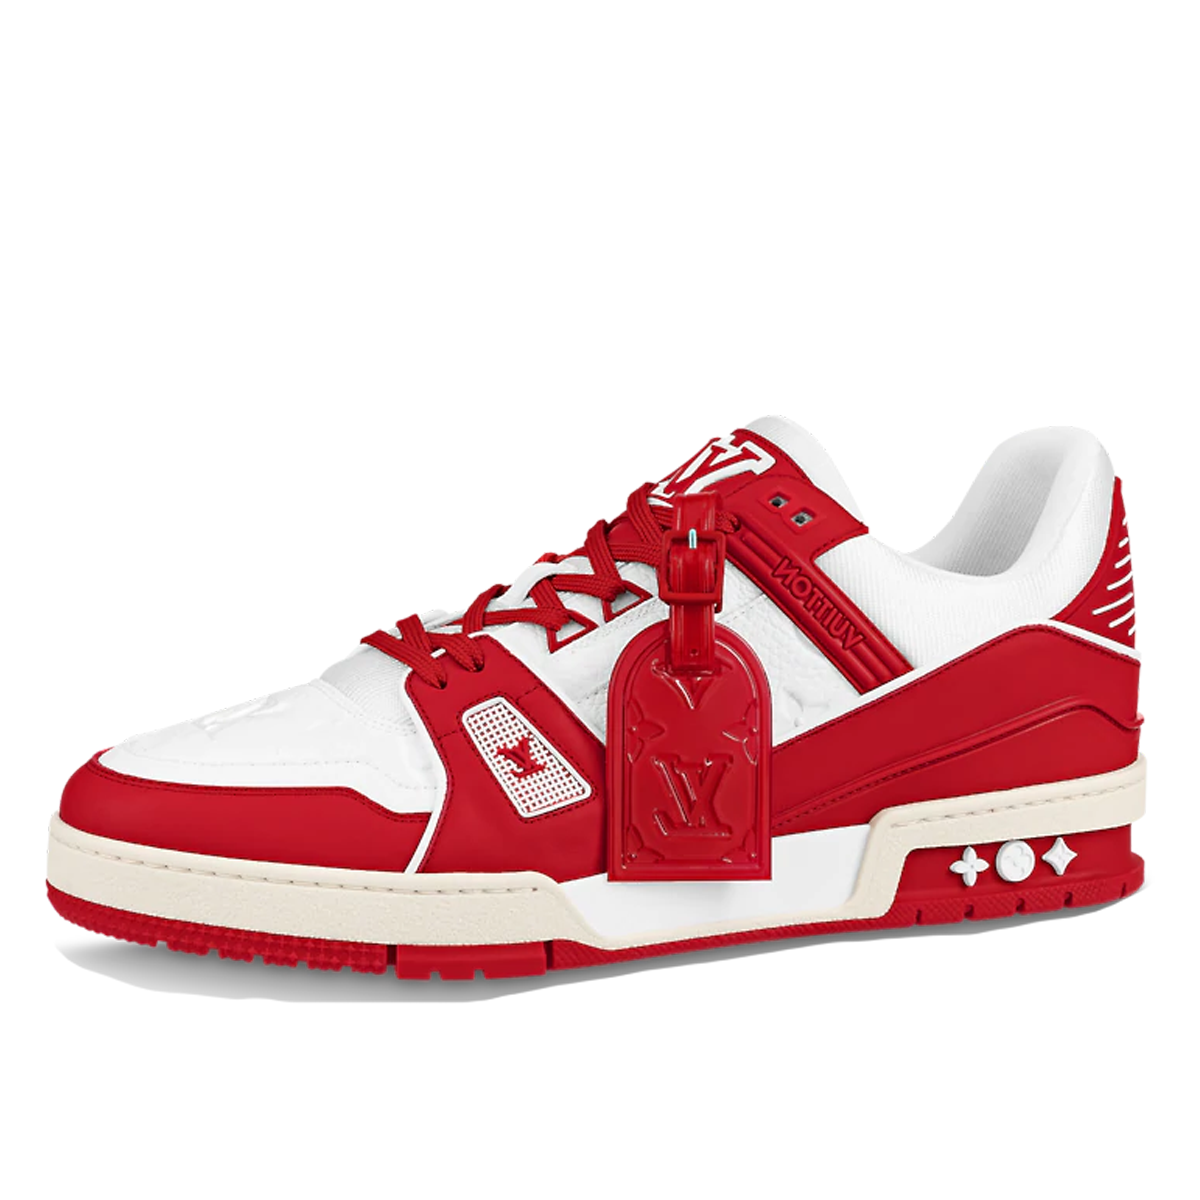 LOUIS VUITTON BY VIRGIL ABLOH RED PRODUCT RED SNEAKERS 1A8PJW SIZE: 8 FITS  UK9